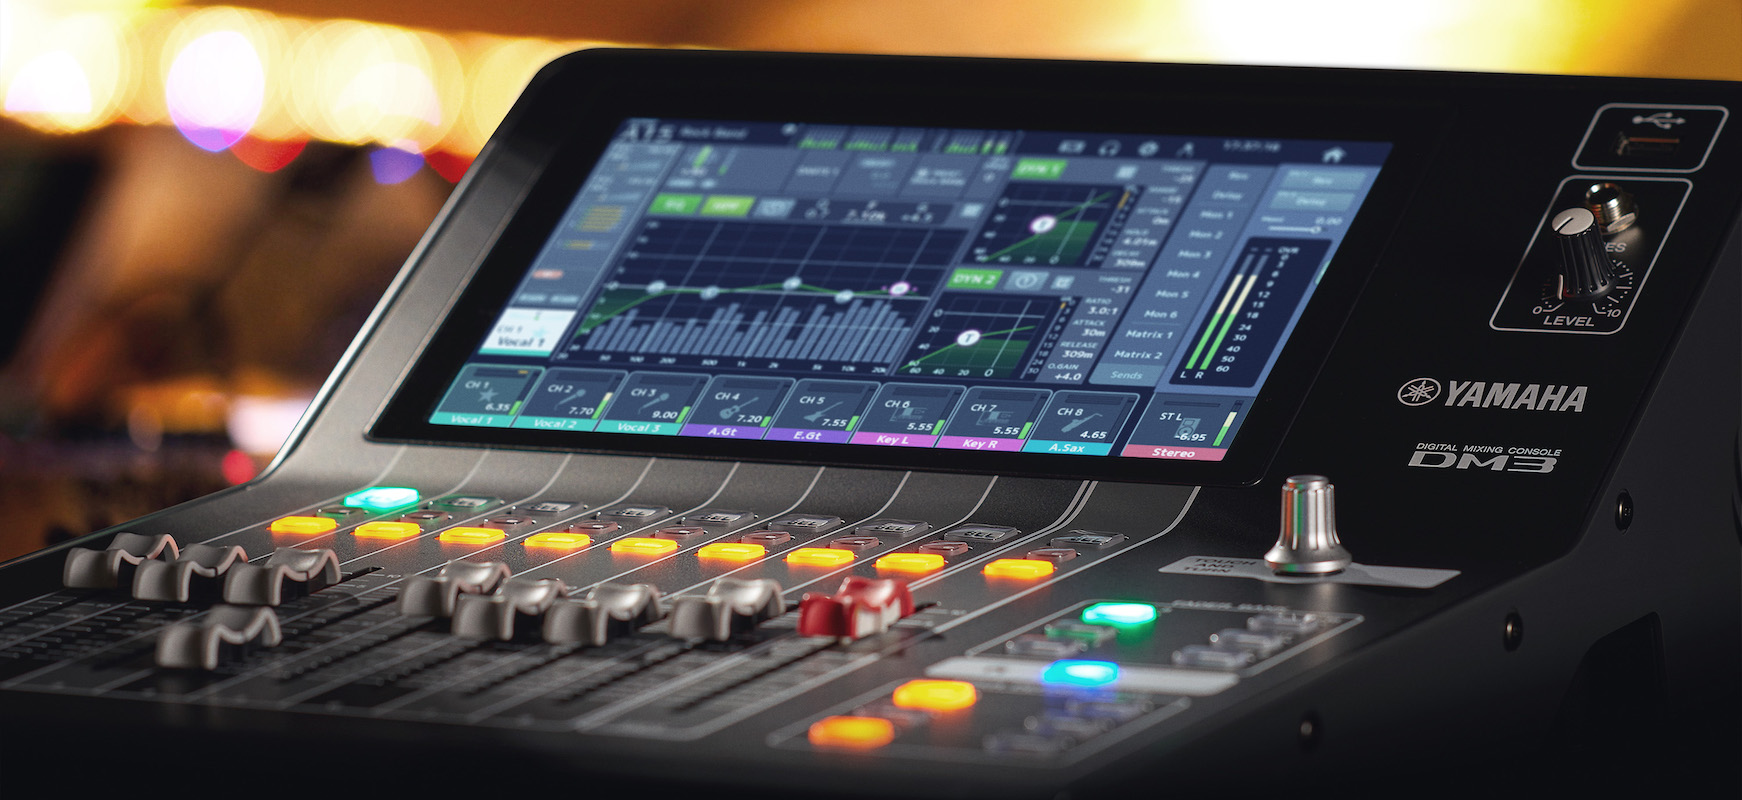 Close up view of the DM3 focused on the center of the mixing console.